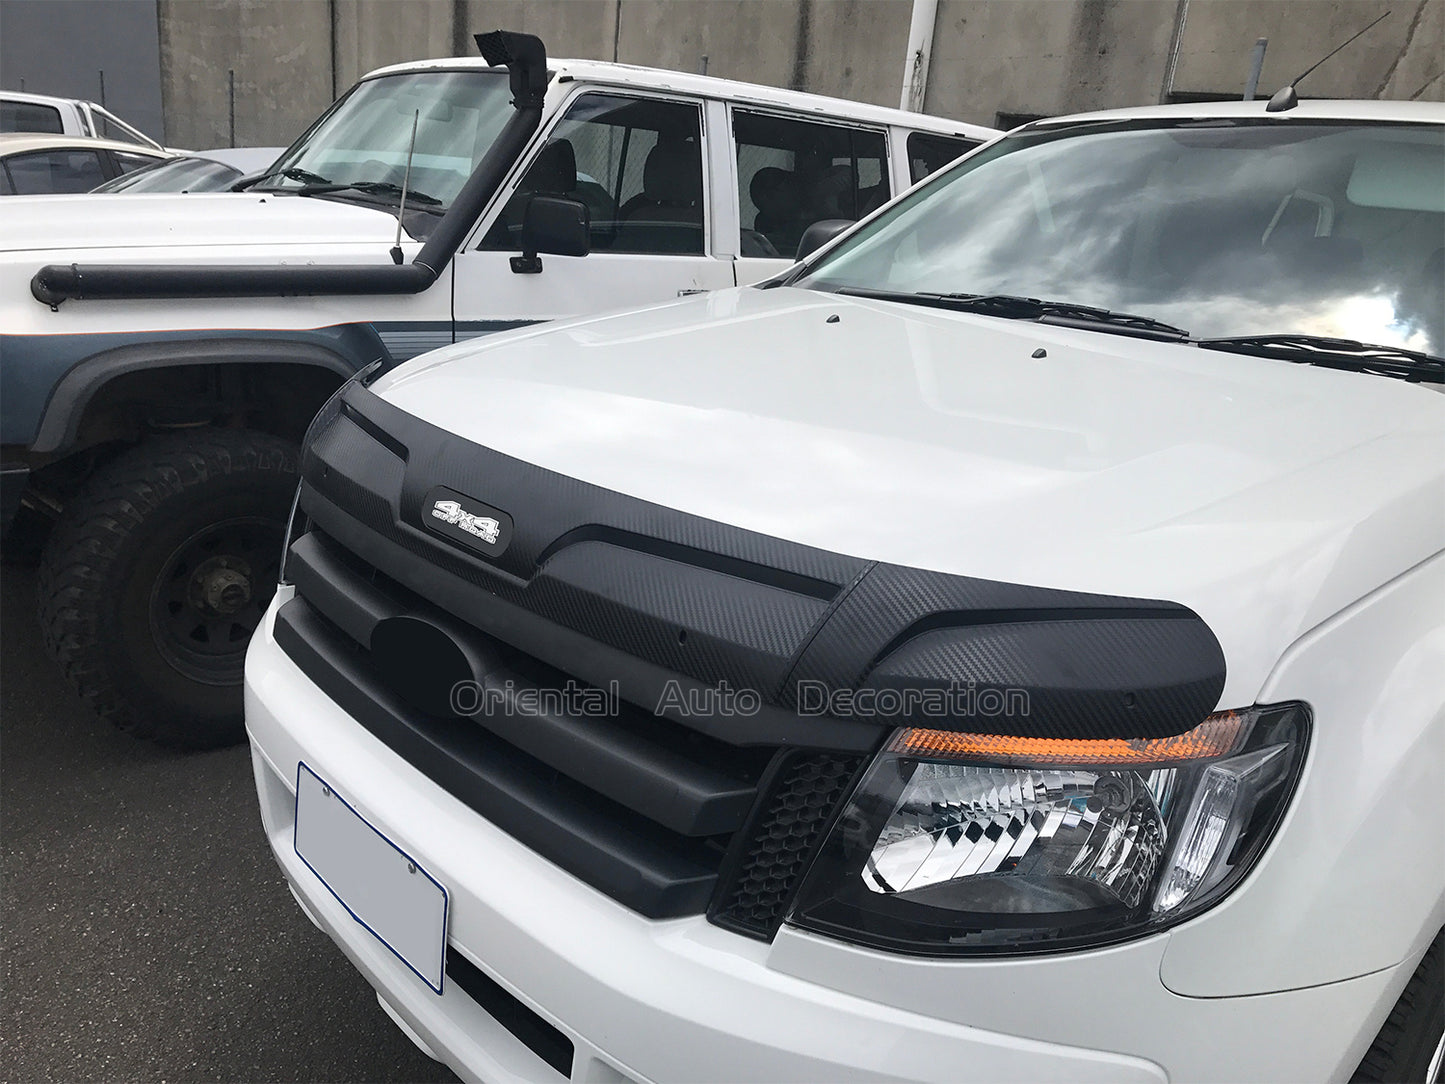 Injection Bonnet Protector & Premium Weathershield for Ford Ranger Single / Extra Cab 2012-2015 Weather Shields Window Visor + Hood Protector Bonnet Guard